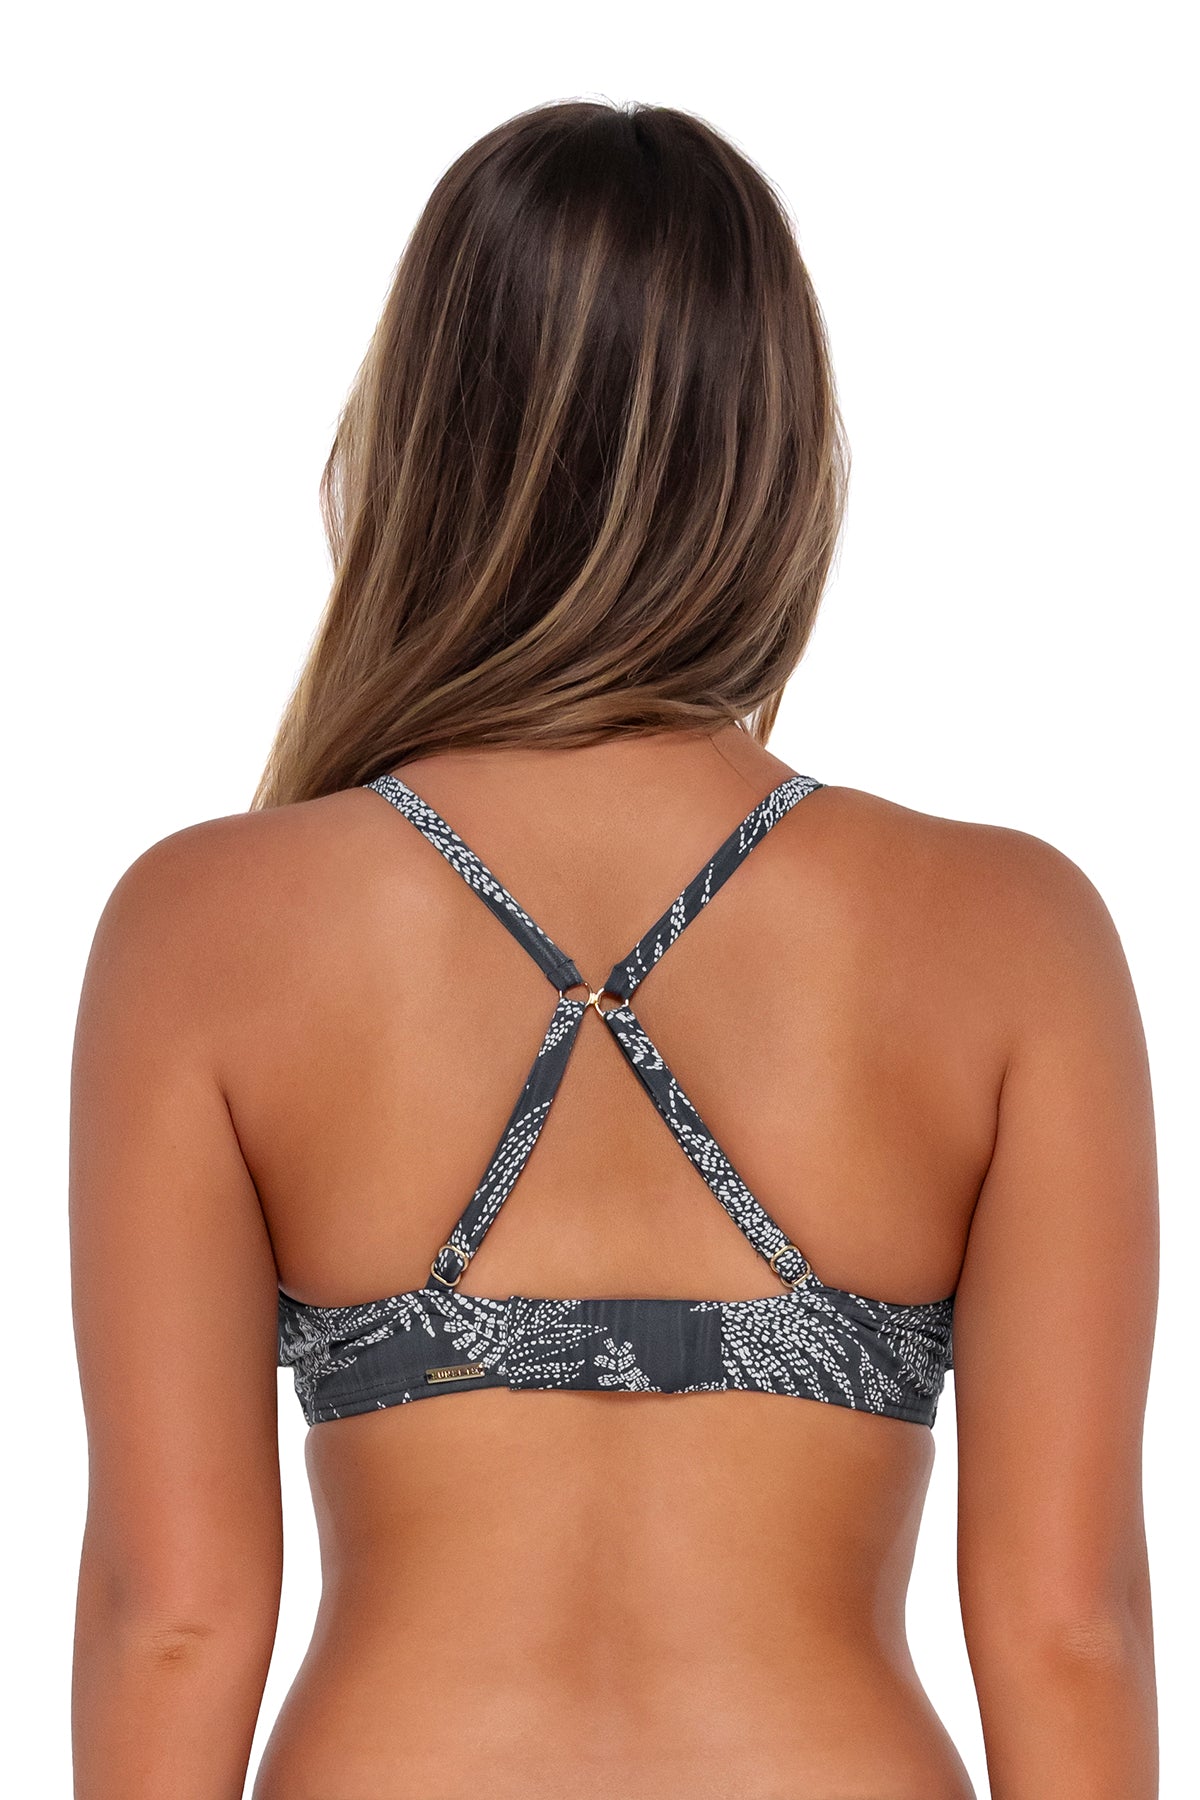 Back pose #1 of Taylor wearing Sunsets Fanfare Seagrass Texture Kauai Keyhole Top showing crossback straps